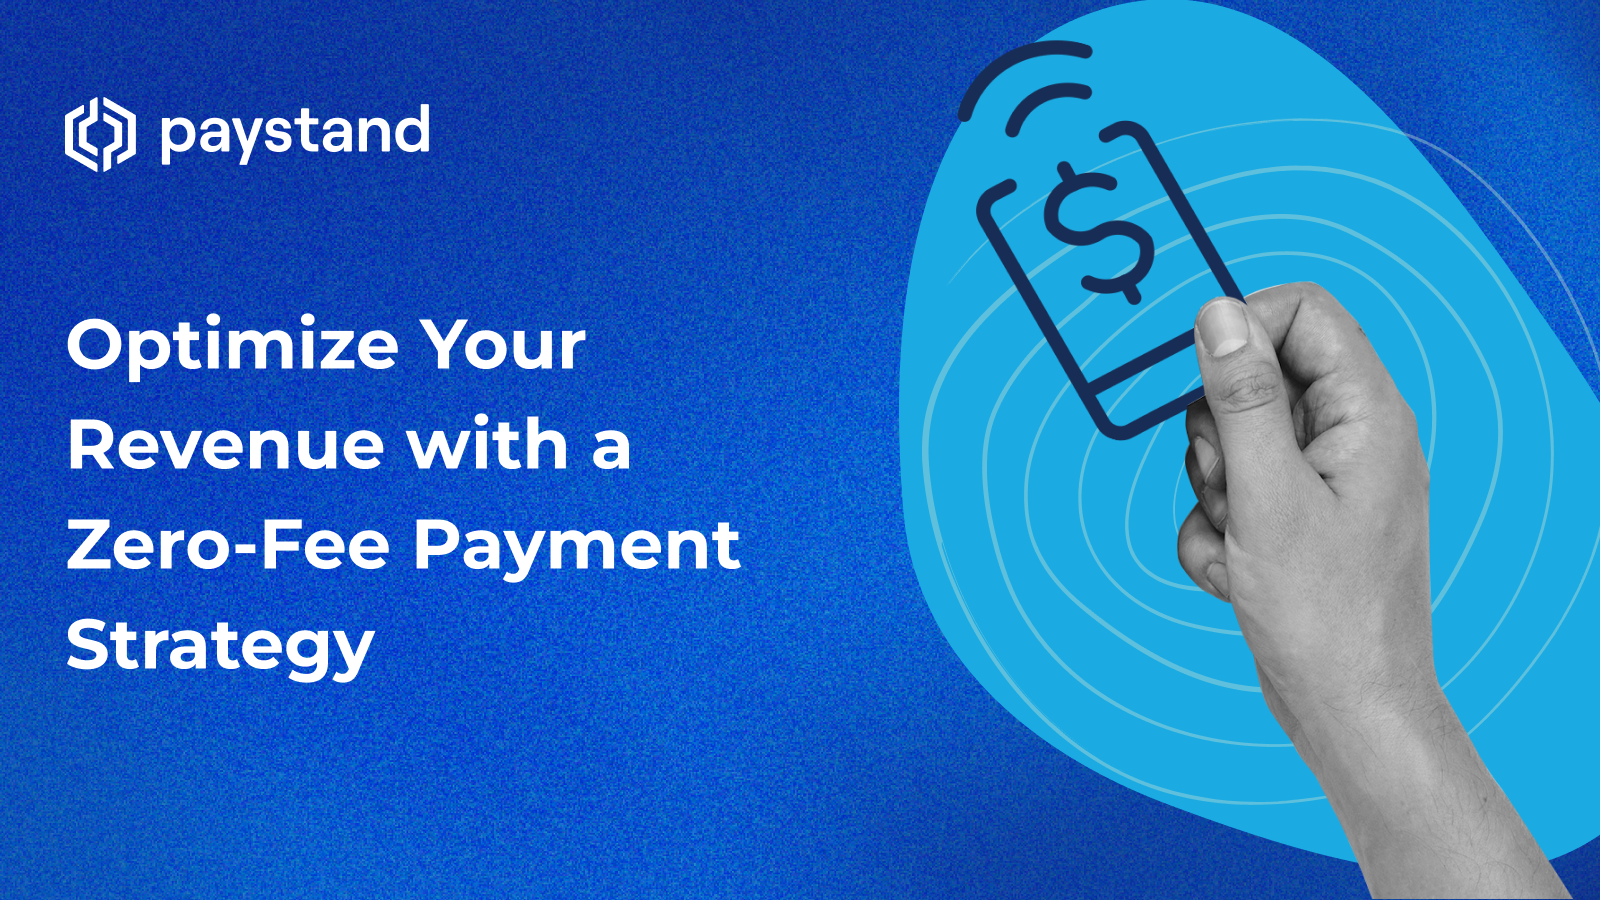 Optimize Your Revenue with a Zero-Fee Payment Strategy